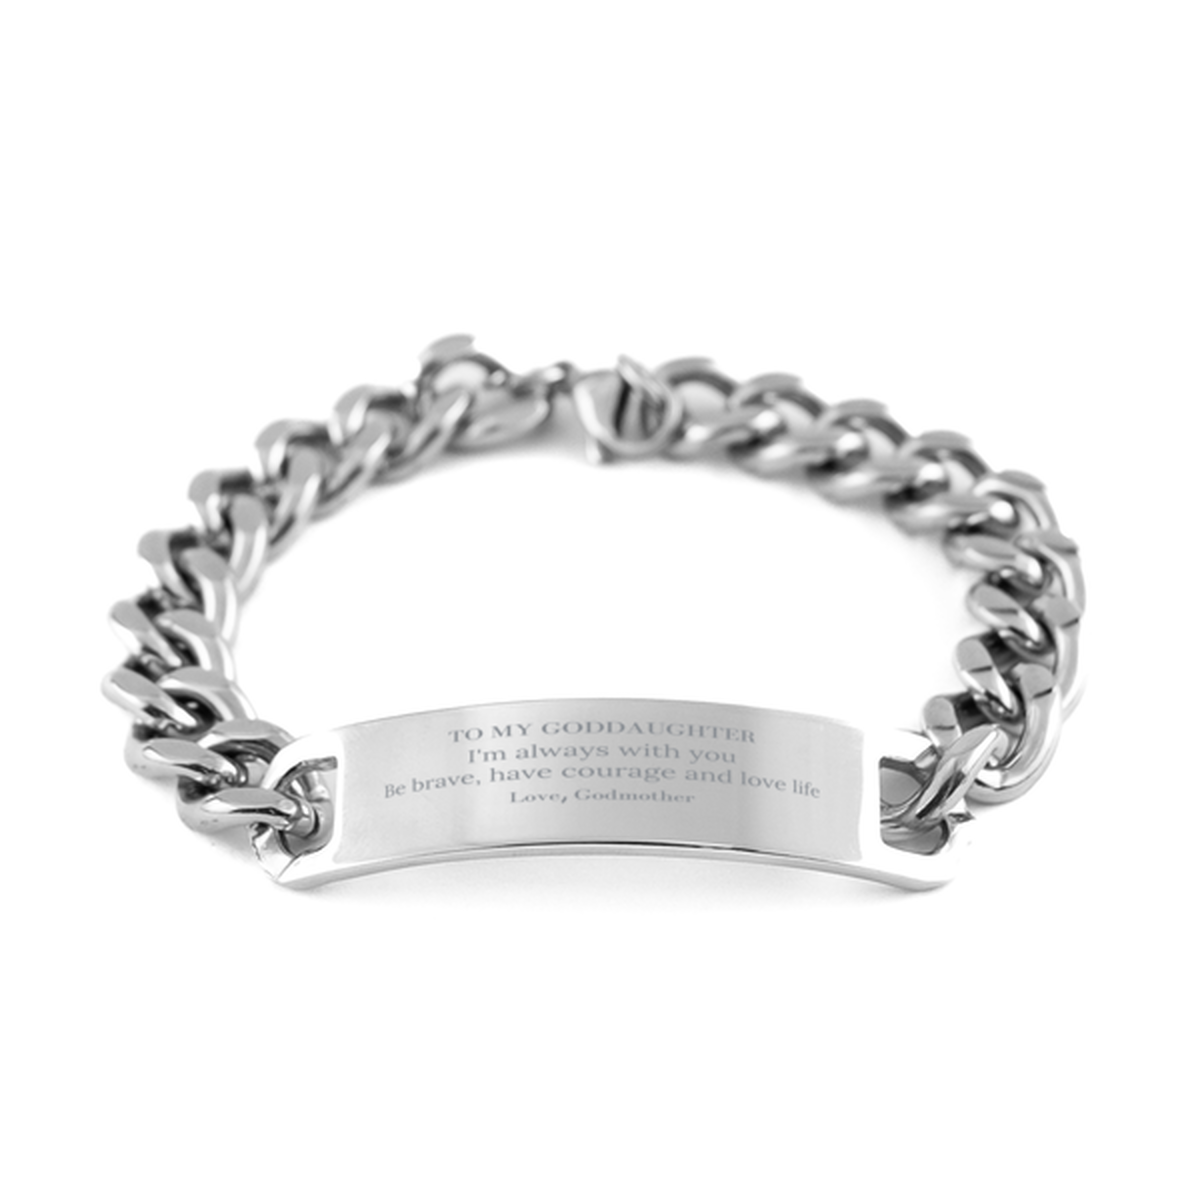 To My Goddaughter Gifts from Godmother, Unique Cuban Chain Stainless Steel Bracelet Inspirational Christmas Birthday Graduation Gifts for Goddaughter I'm always with you. Be brave, have courage and love life. Love, Godmother